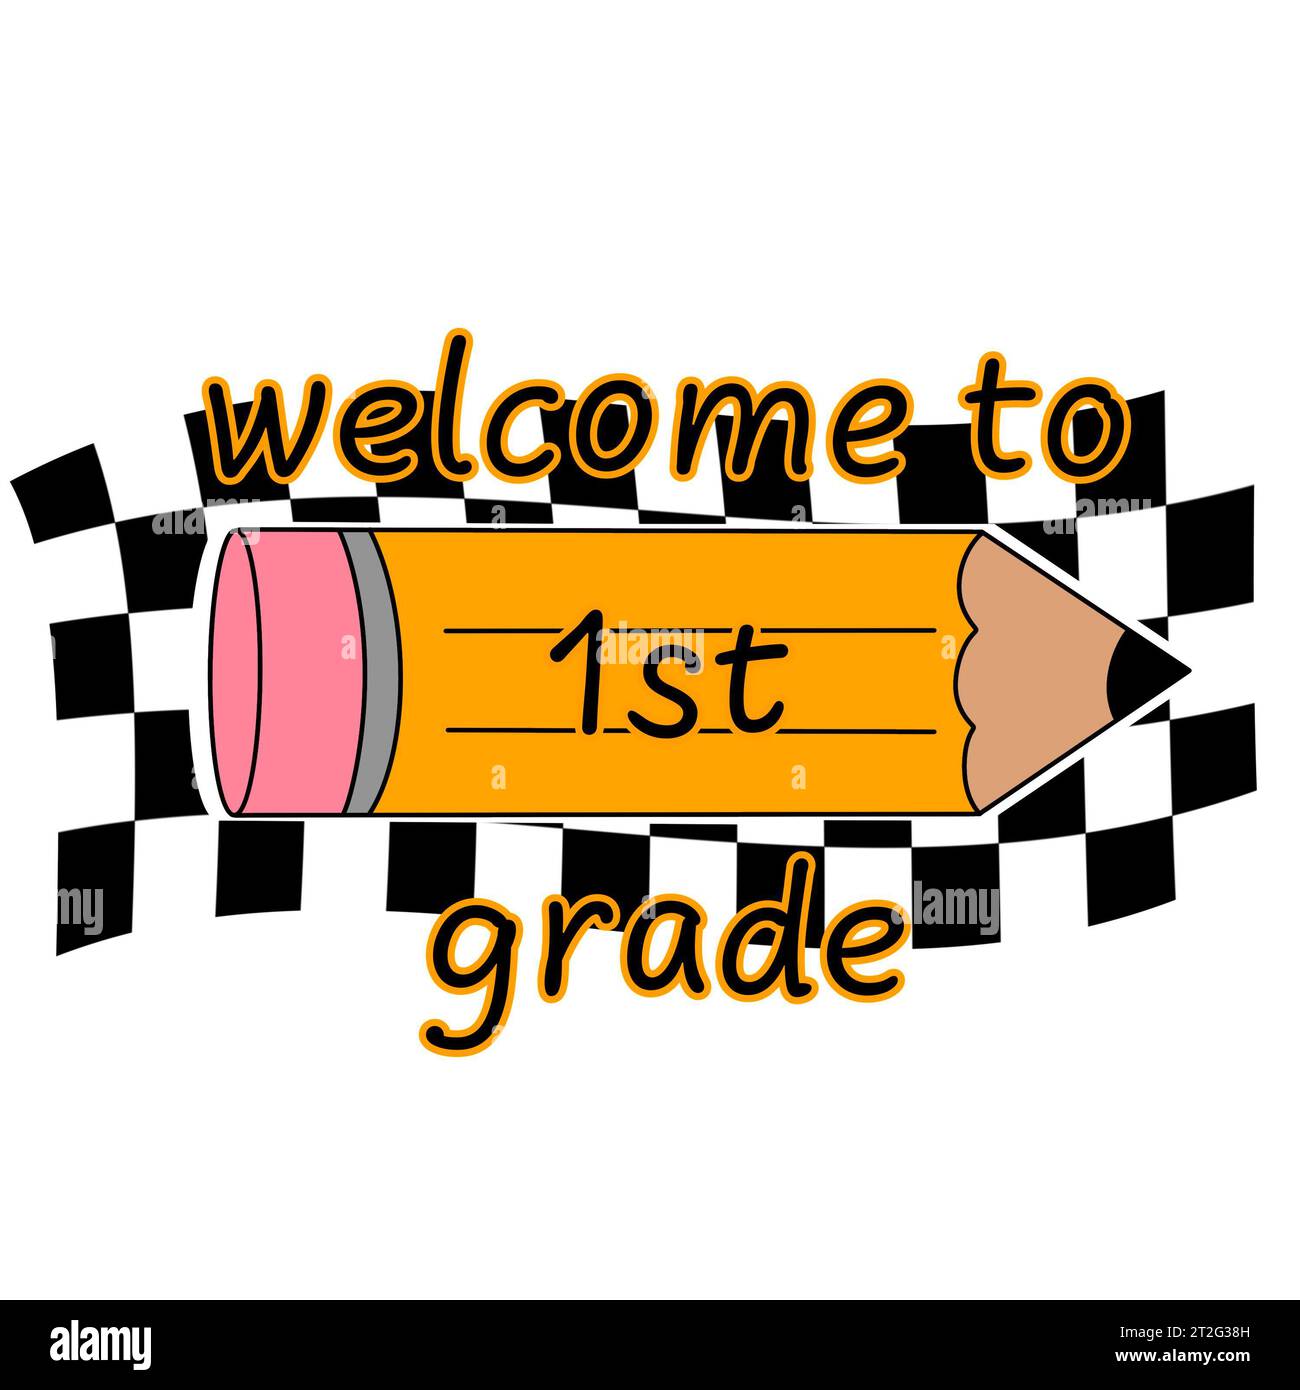 Welcome to first grade clip art with yellow pencil on checkerboard pattern background, isolated on white background Stock Photo